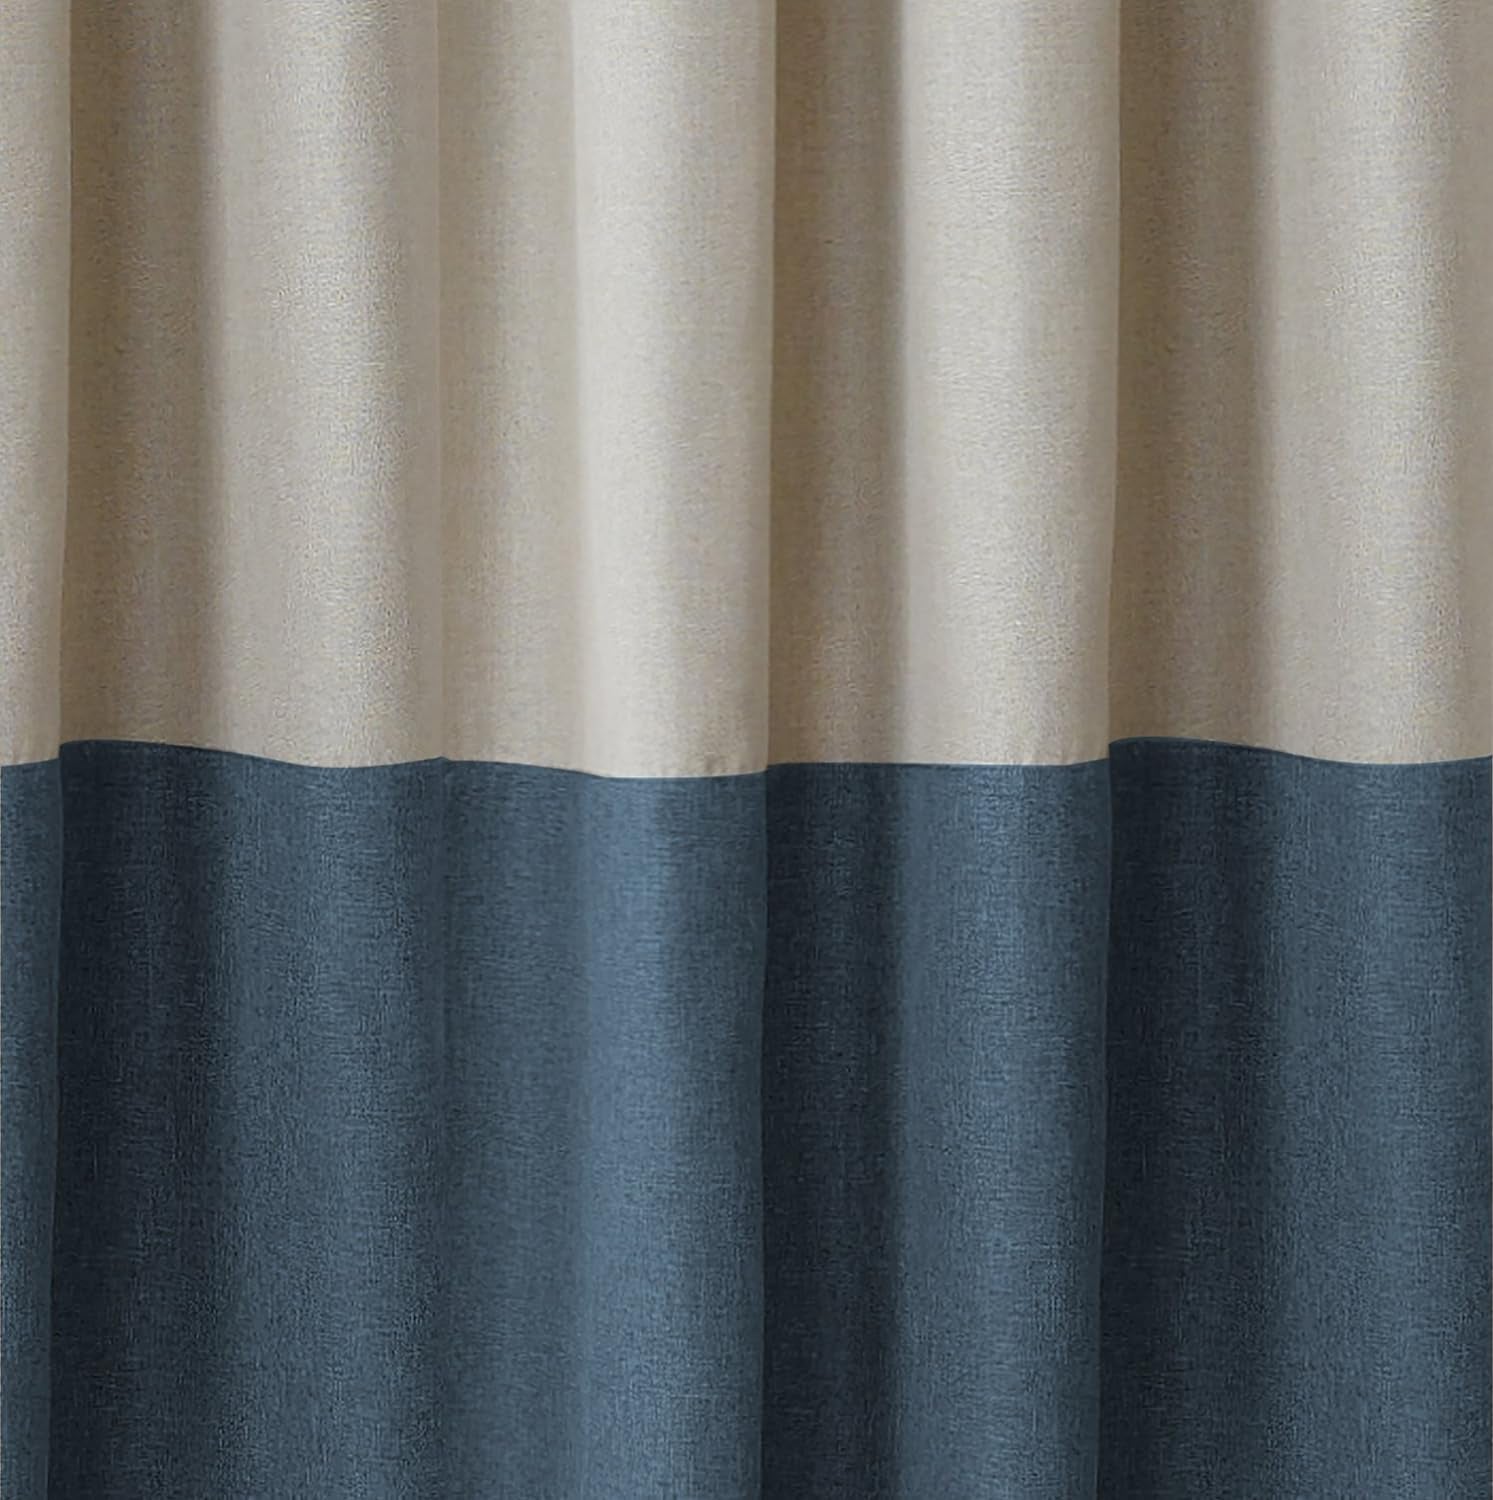 Elrene Home Fashions Braiden Color-Block Blackout Window Curtain, Single Panel, 52 in X 84 in (1 Panel), Navy  Elrene Home Fashions   